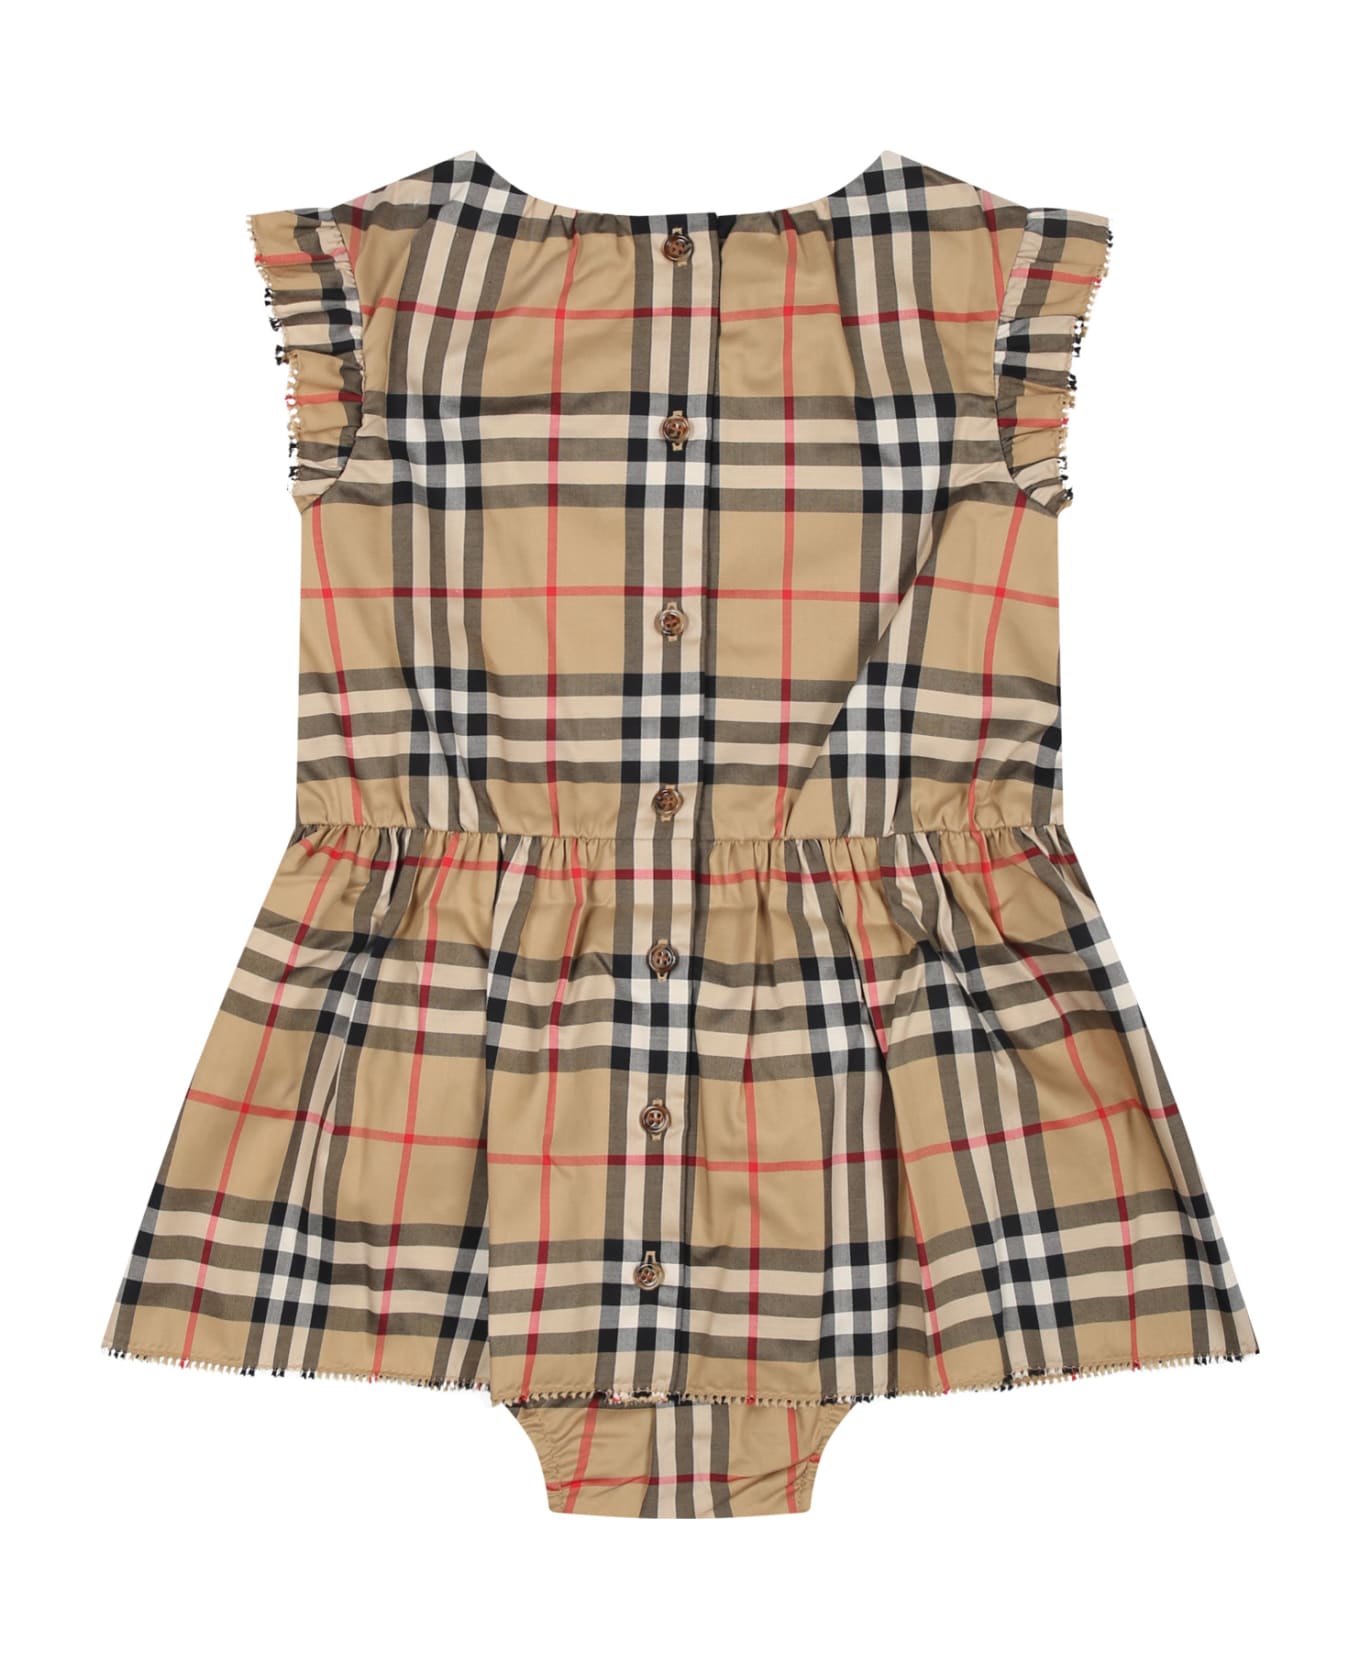 Burberry Beige Dress For Baby Girl With Iconic Vintage Check - Beige